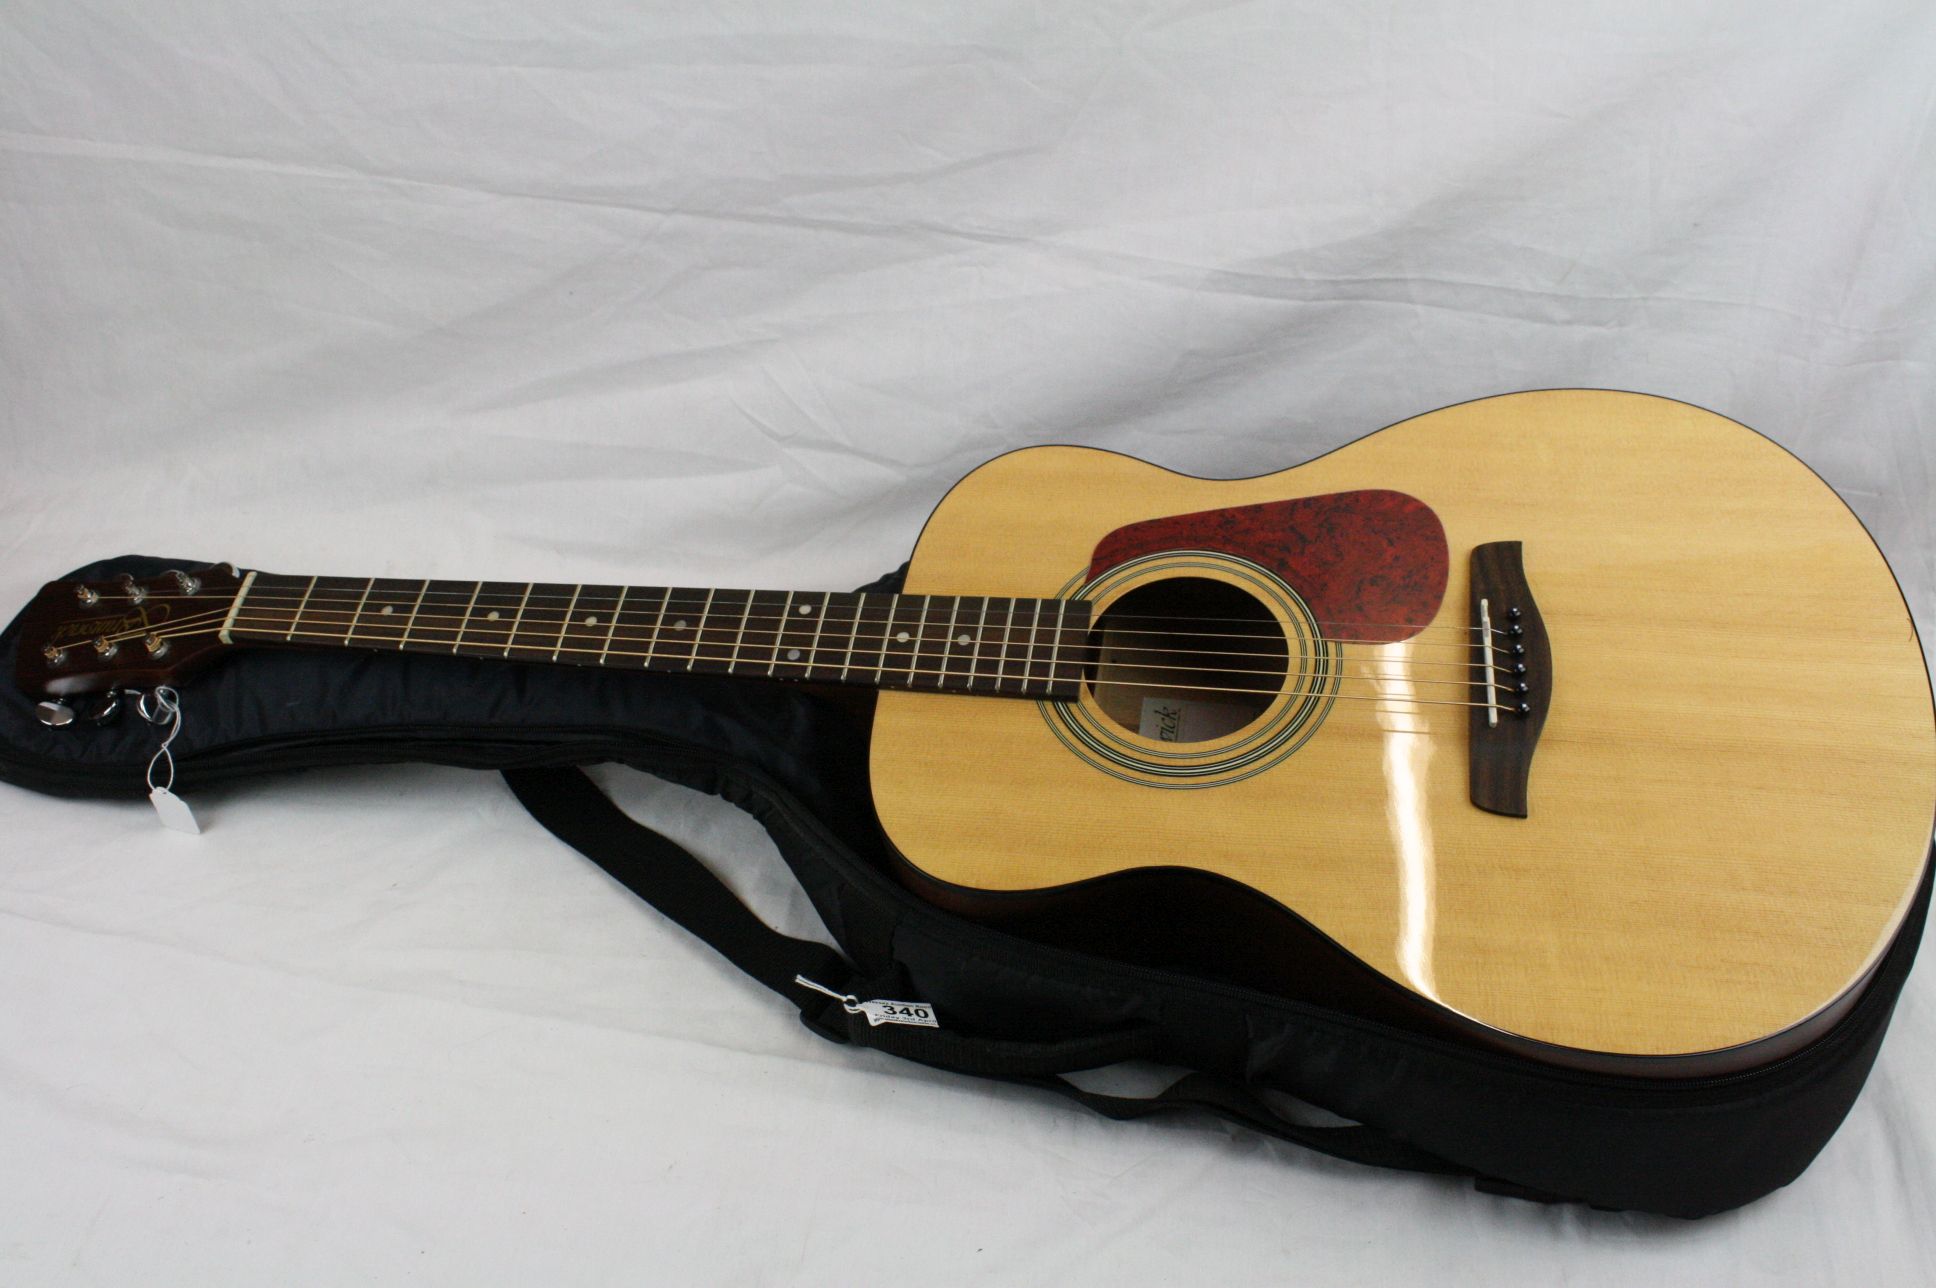 Guitar - A Brunswick BF200 acoustic guitar in natural finish, along with a gig bag. Good condition. - Image 6 of 6